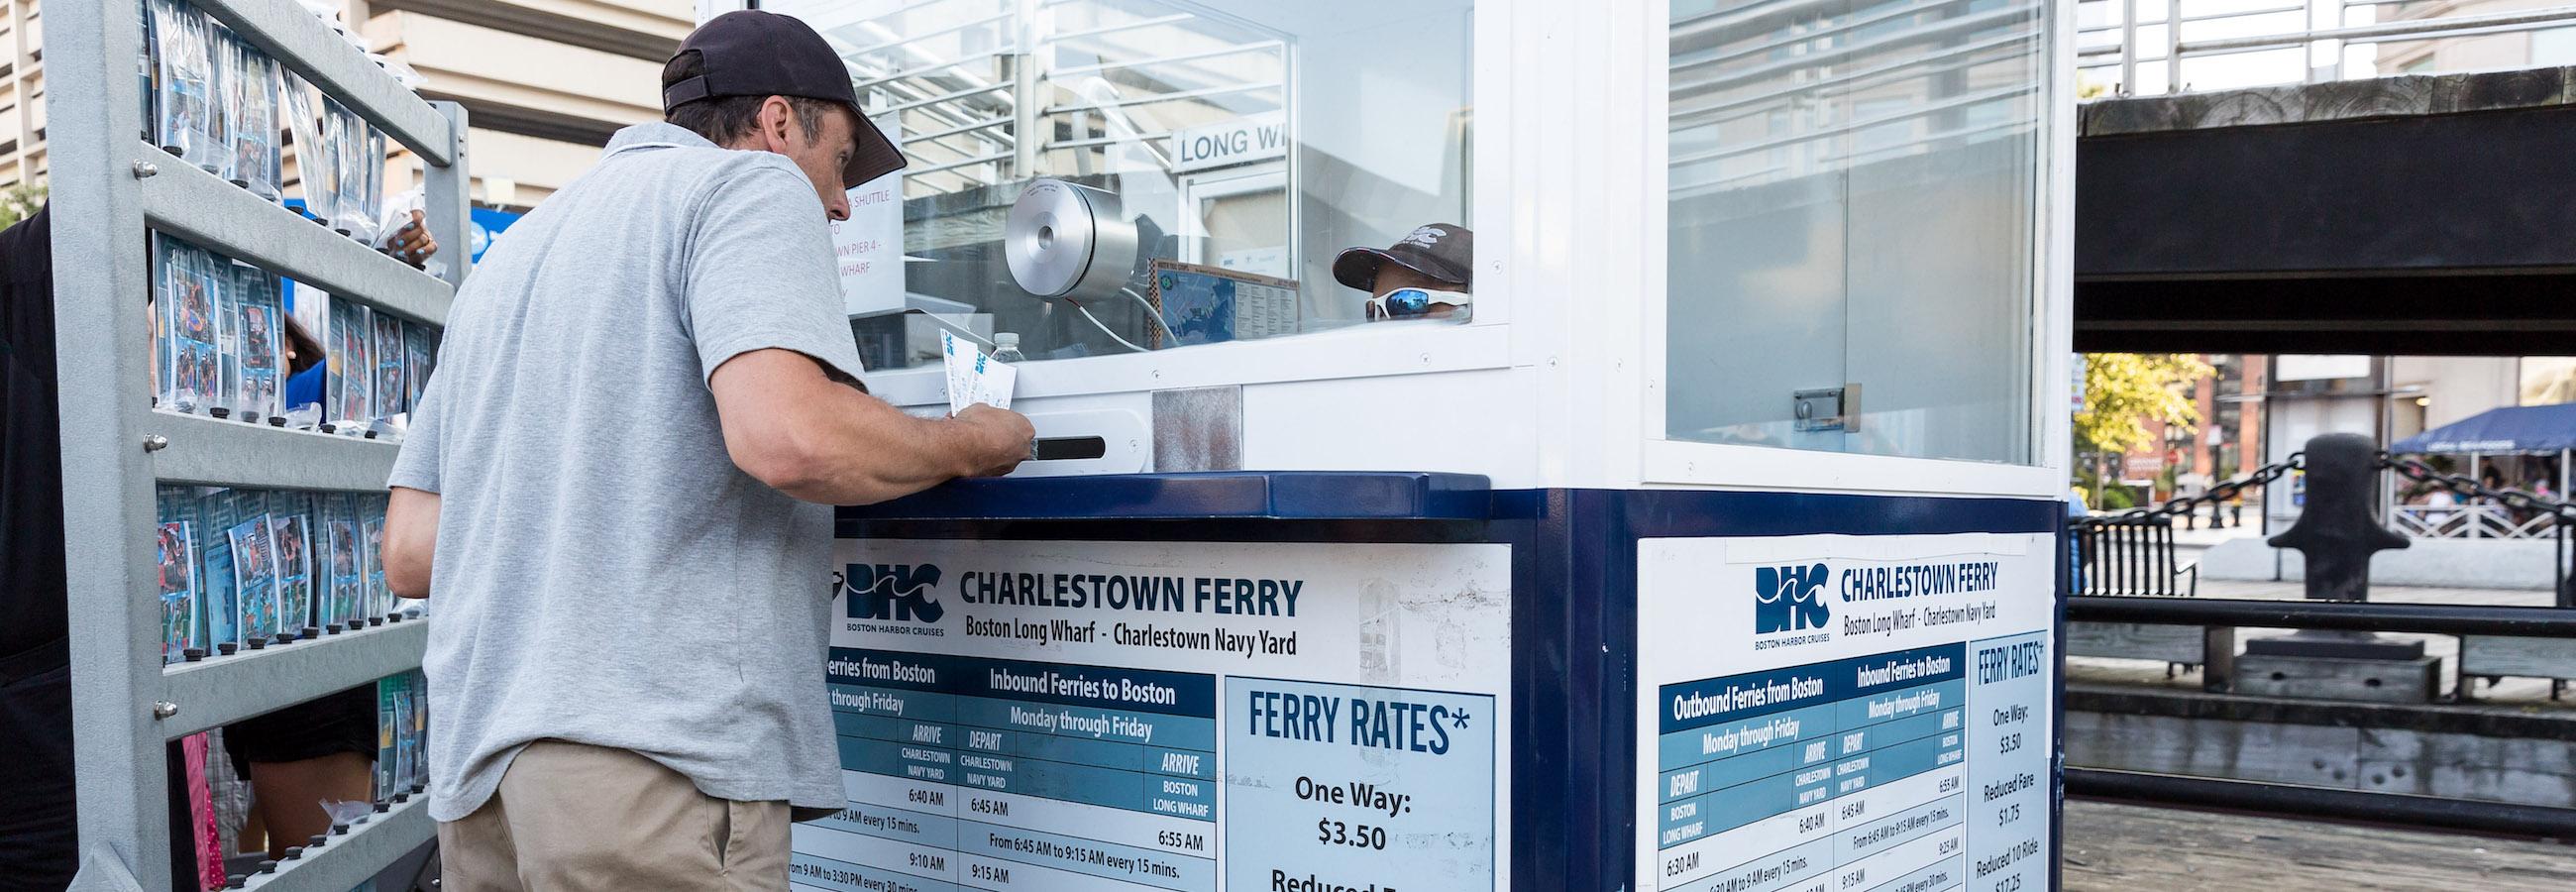 customer buying tickets for charlestown ferry